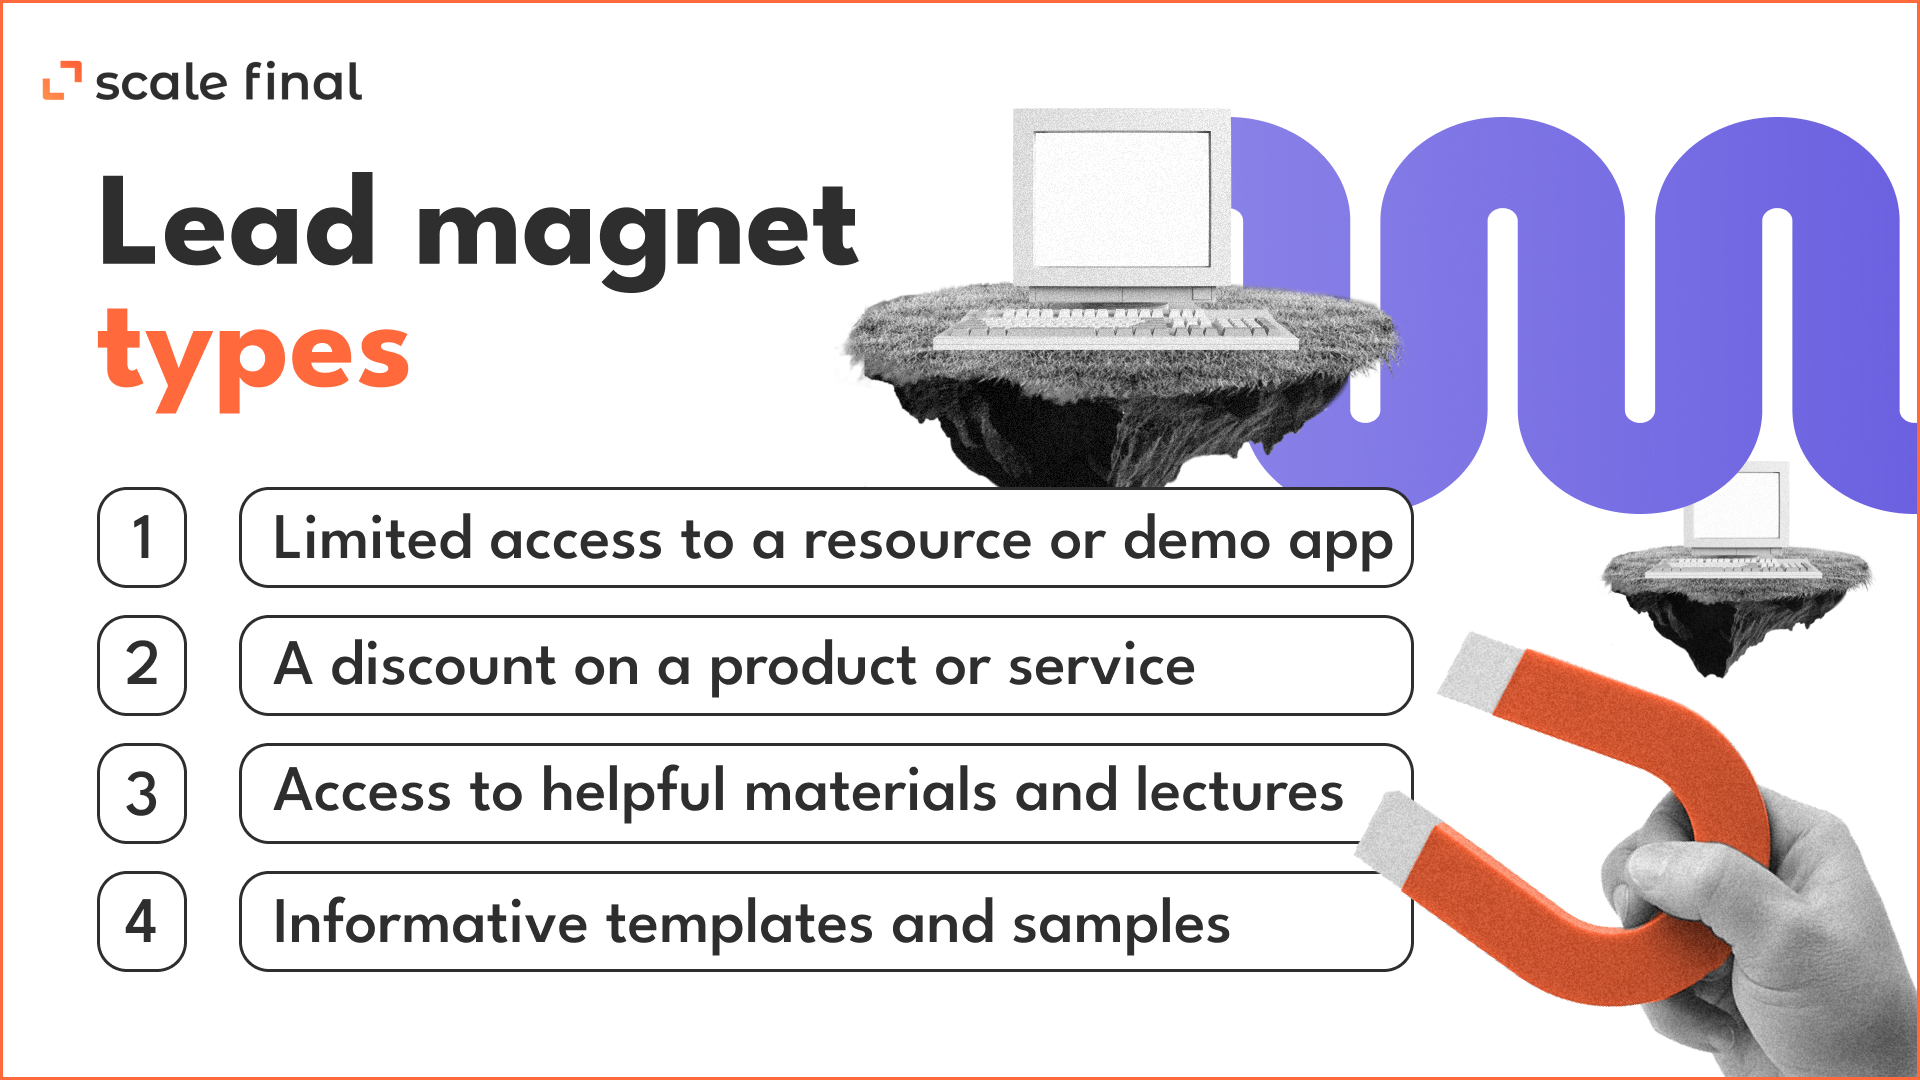 Lead magnet typeslimited access to a resource or demo app,a discount on a product or service,access to helpful materials and lectures,informative templates and samples.